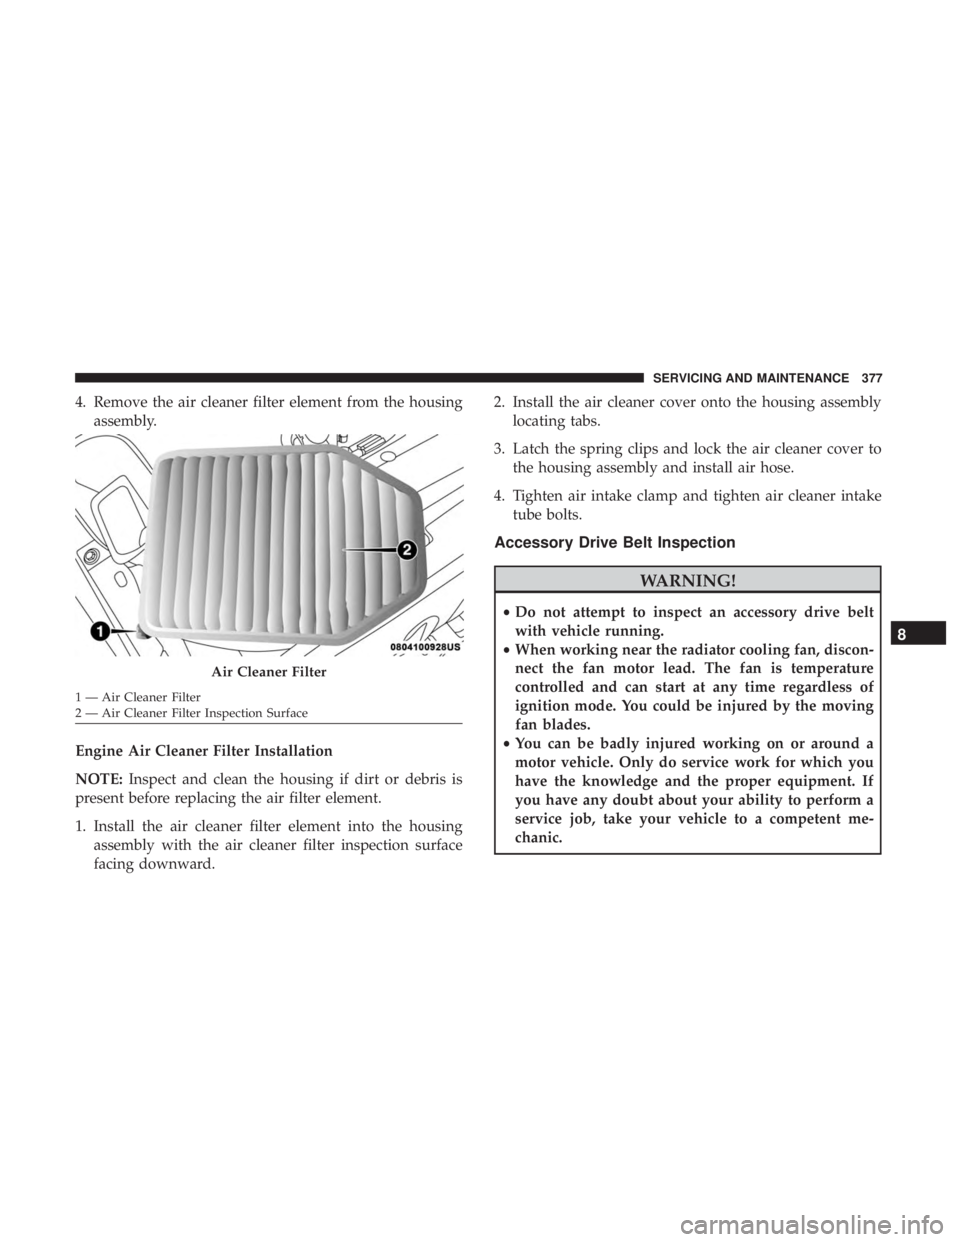 JEEP WRANGLER UNLIMITED SPORT 2016  Owners Manual 4. Remove the air cleaner filter element from the housingassembly.
Engine Air Cleaner Filter Installation
NOTE: Inspect and clean the housing if dirt or debris is
present before replacing the air filt